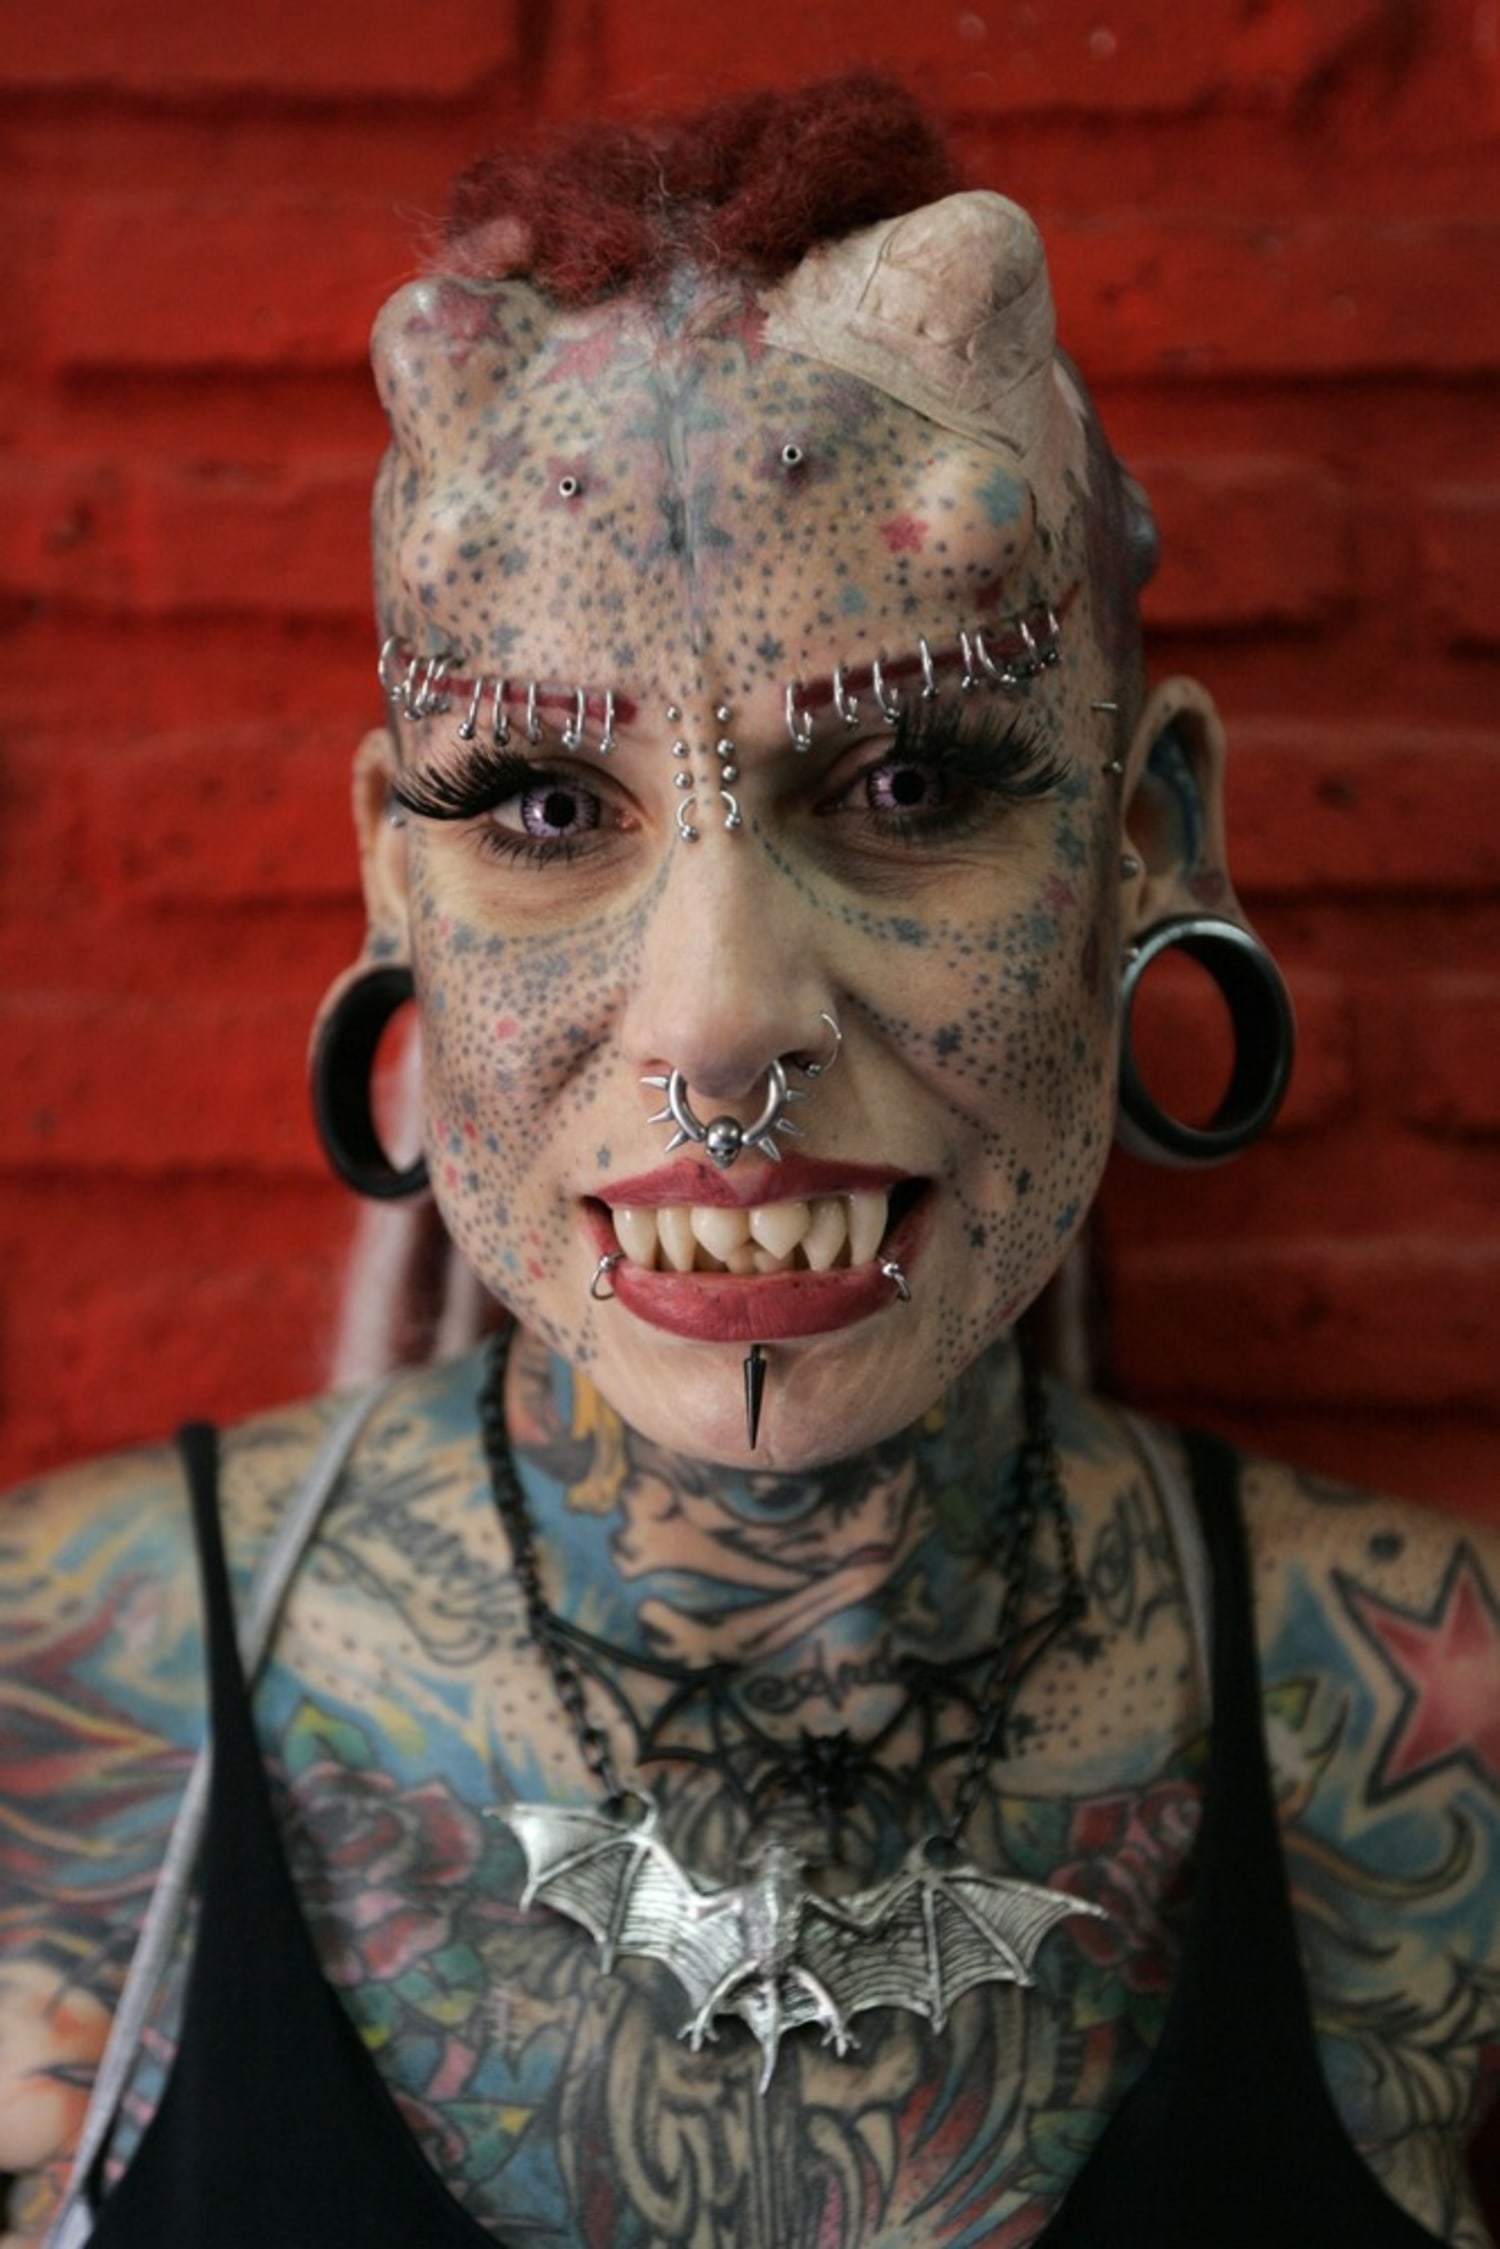 Vampire woman, who prefers to be called Jaguar Woman, got her first tattoo  at 14